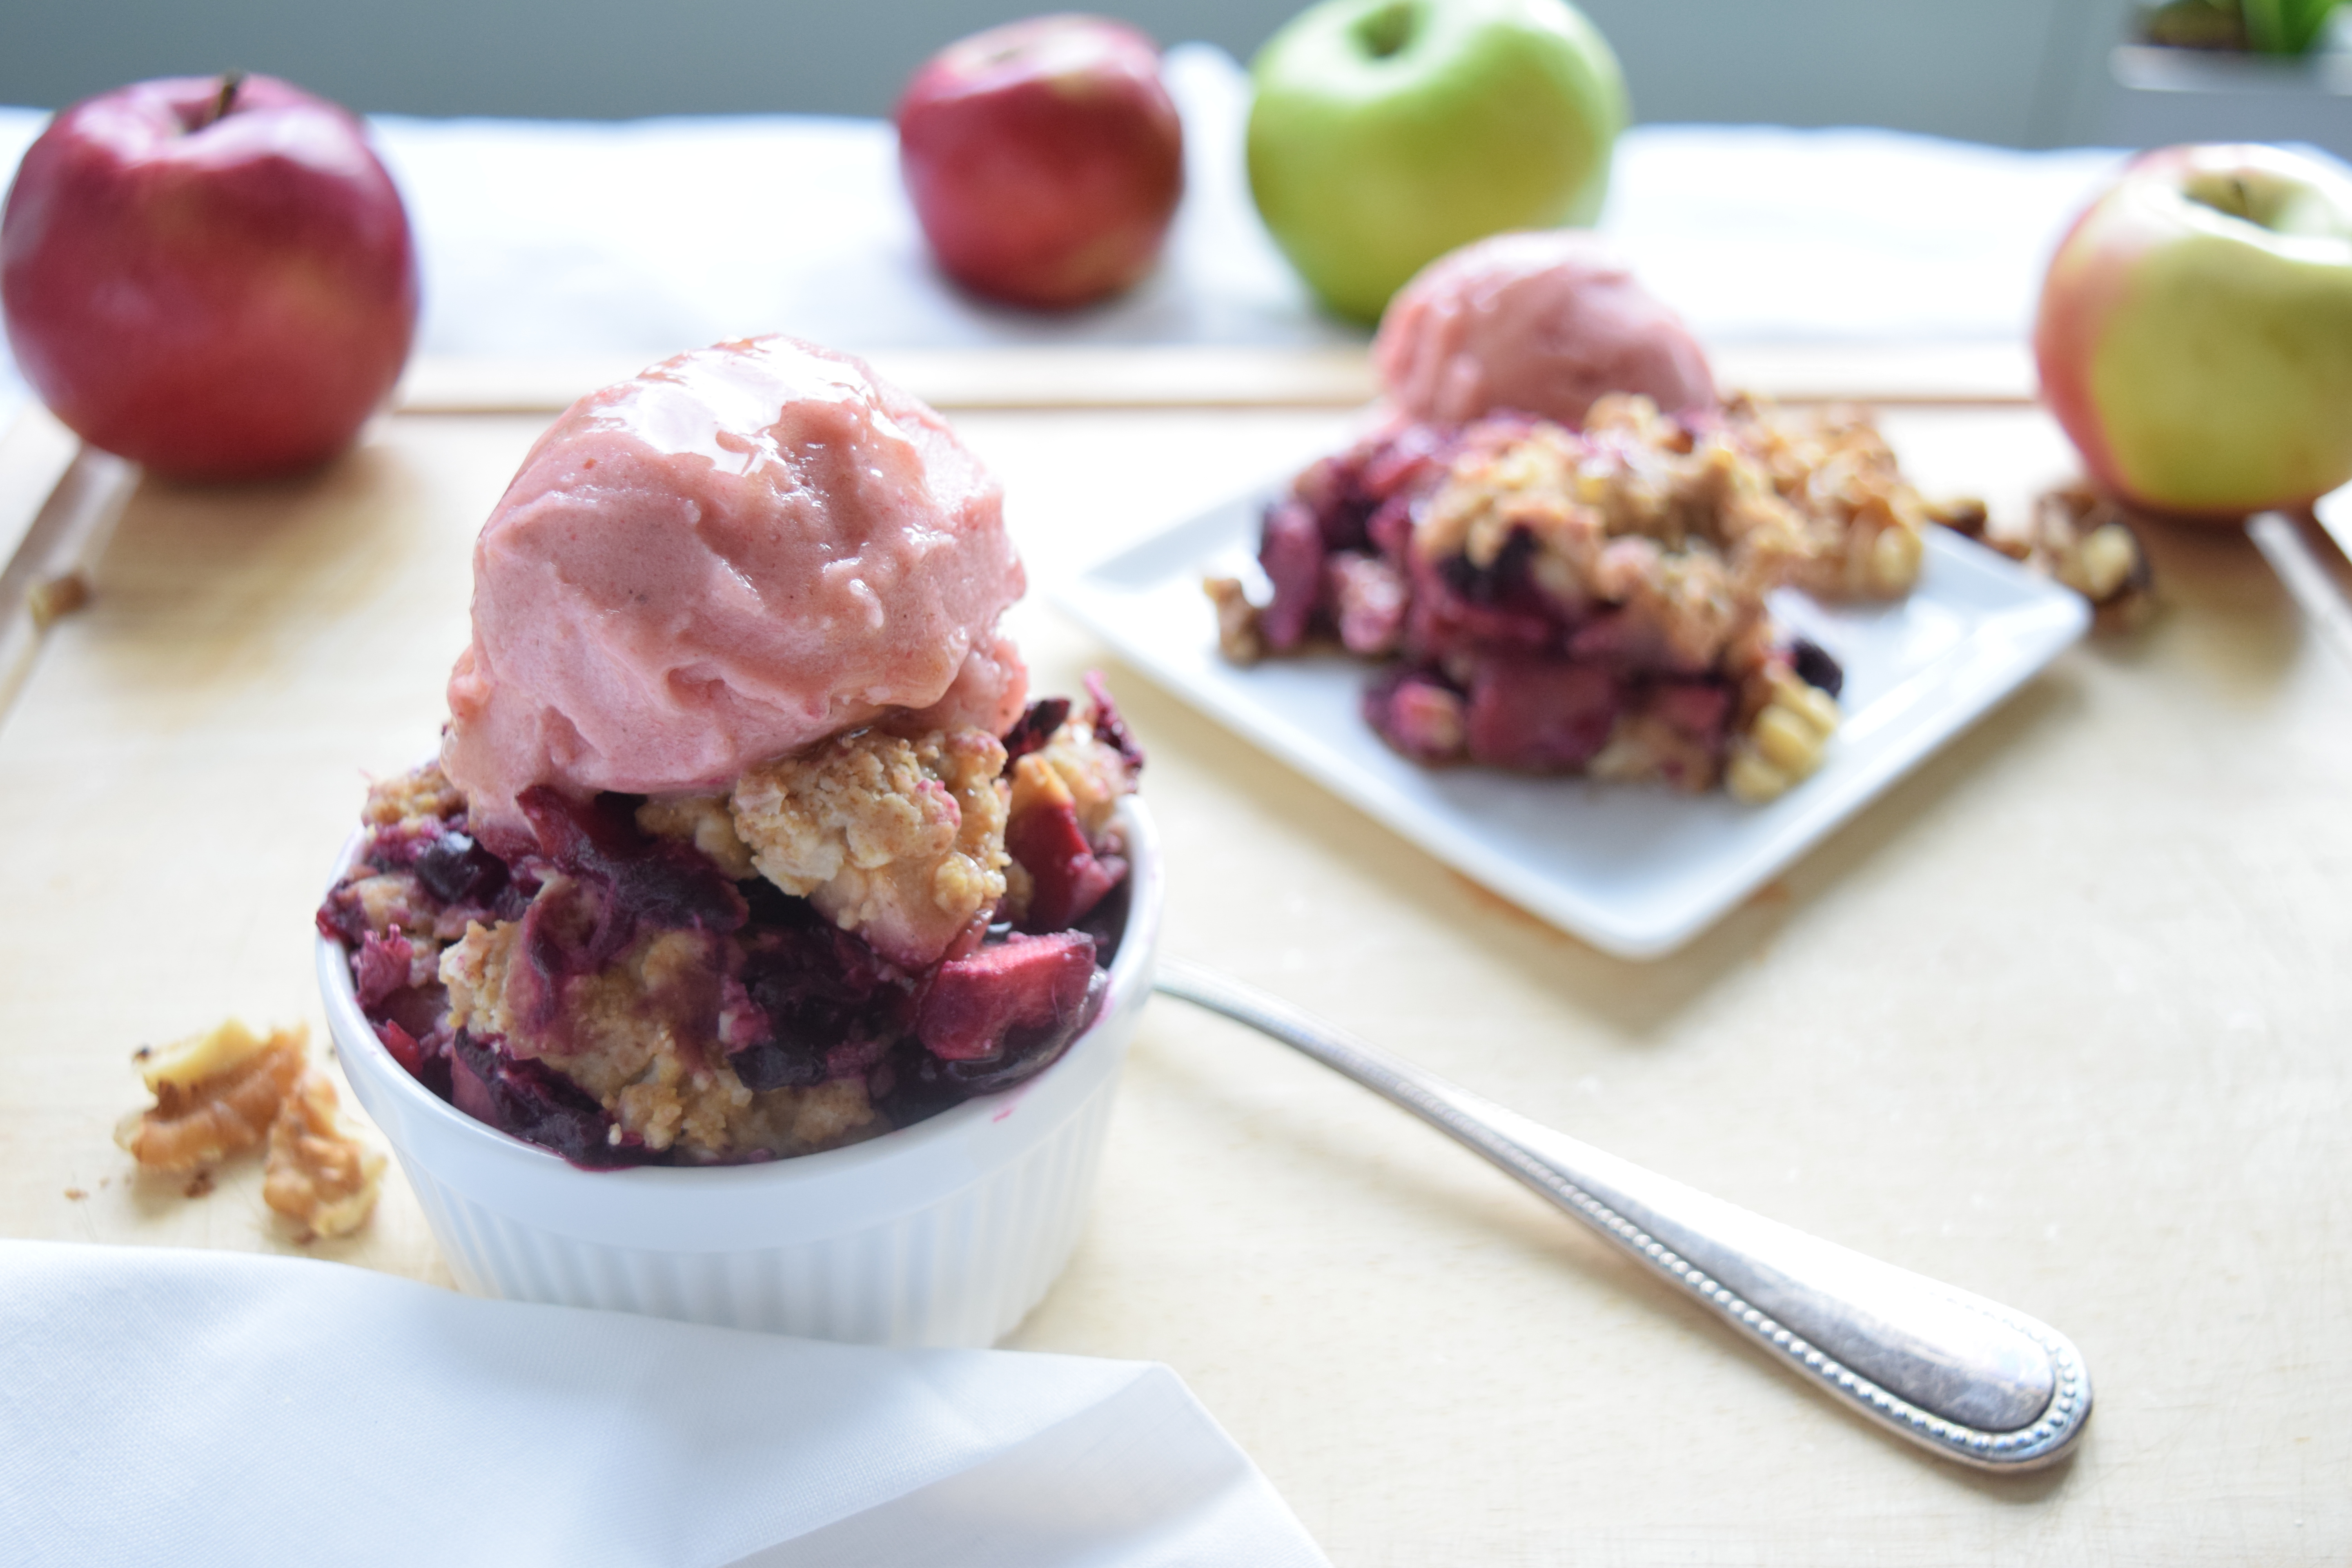 You are currently viewing Vegan Blueberry, Apples and Coconut Crumble